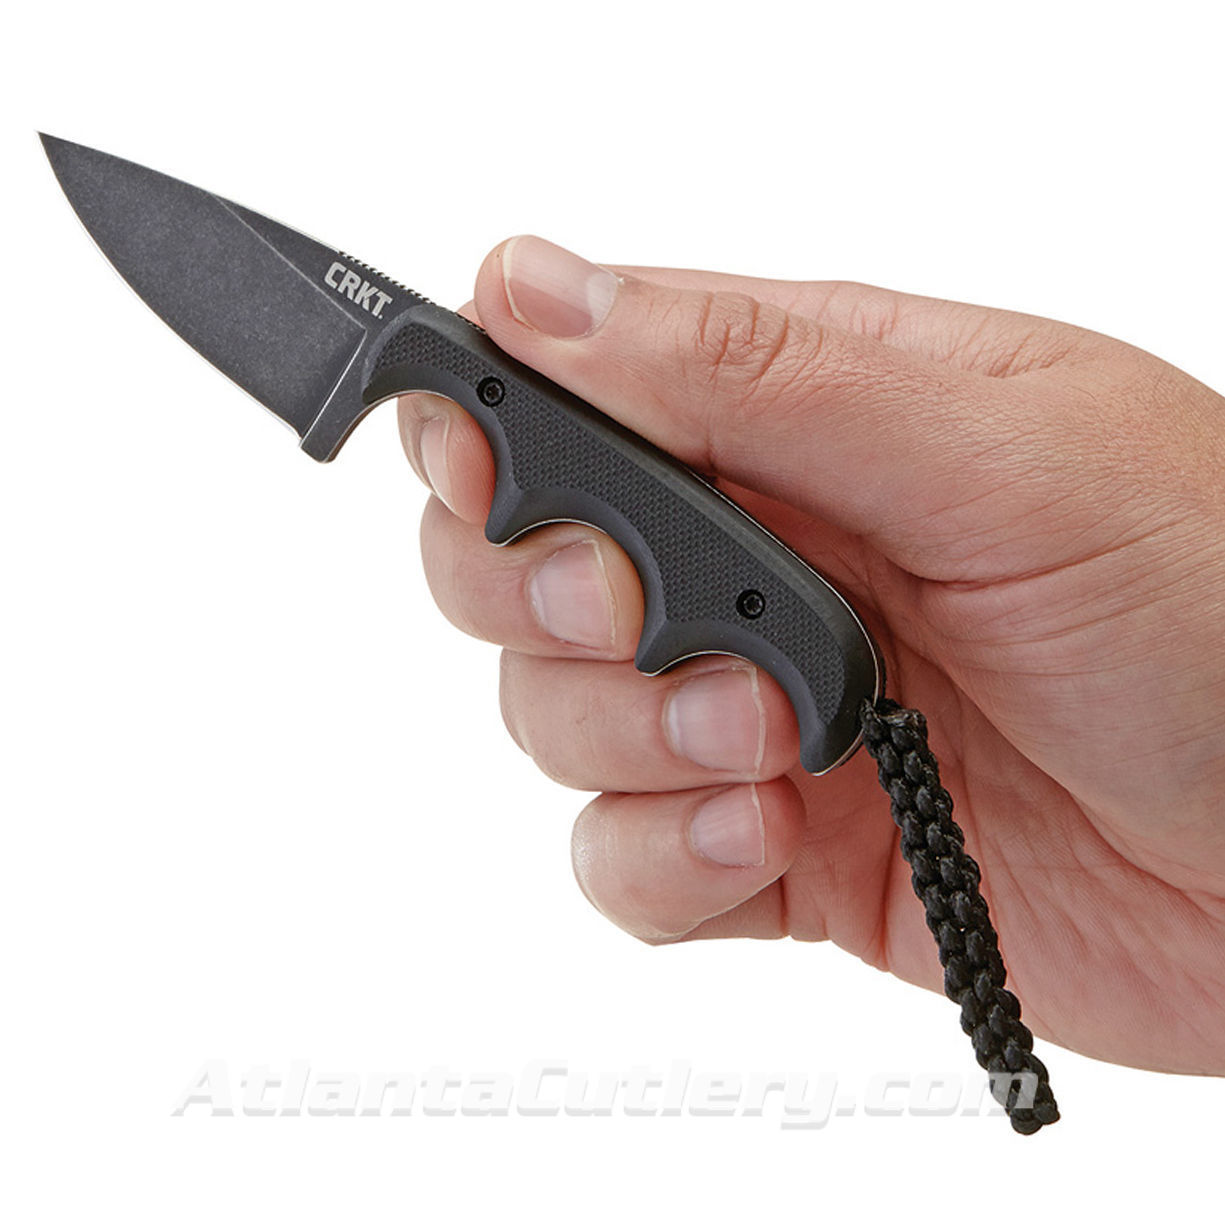 CRKT Minimalist Drop Point knife has 5Cr15MoV blade, G10 handle, cord FOB, sheath, built for anything that needs to be cut